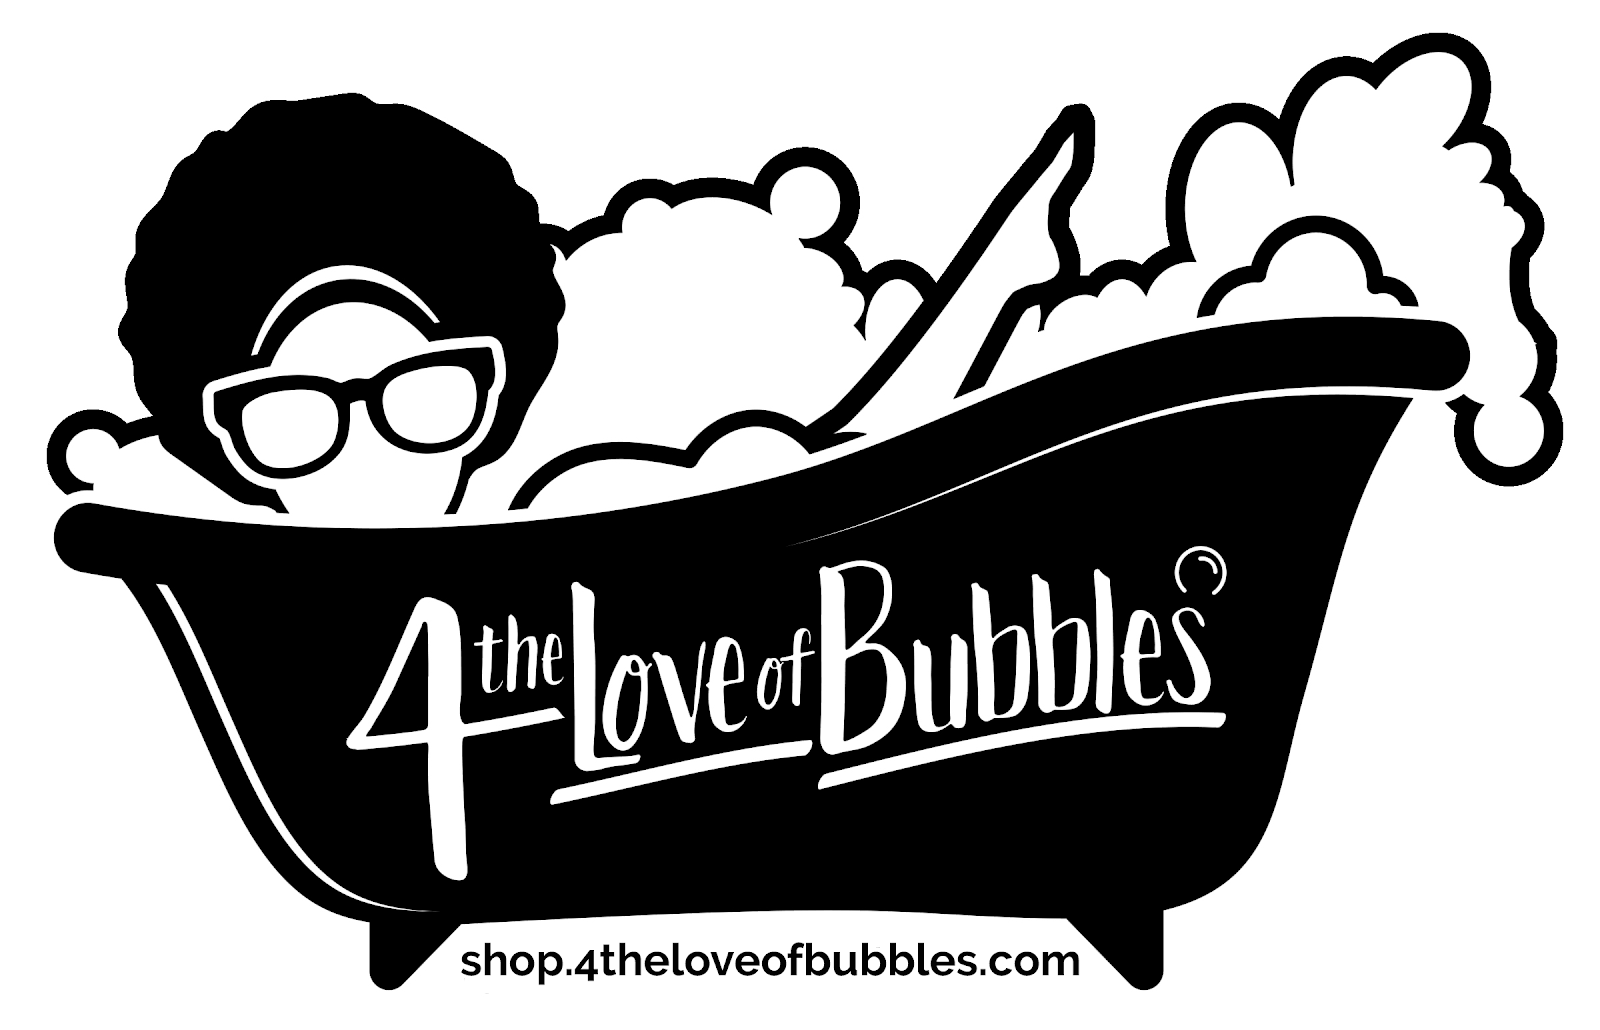 For the Love of Bubbles